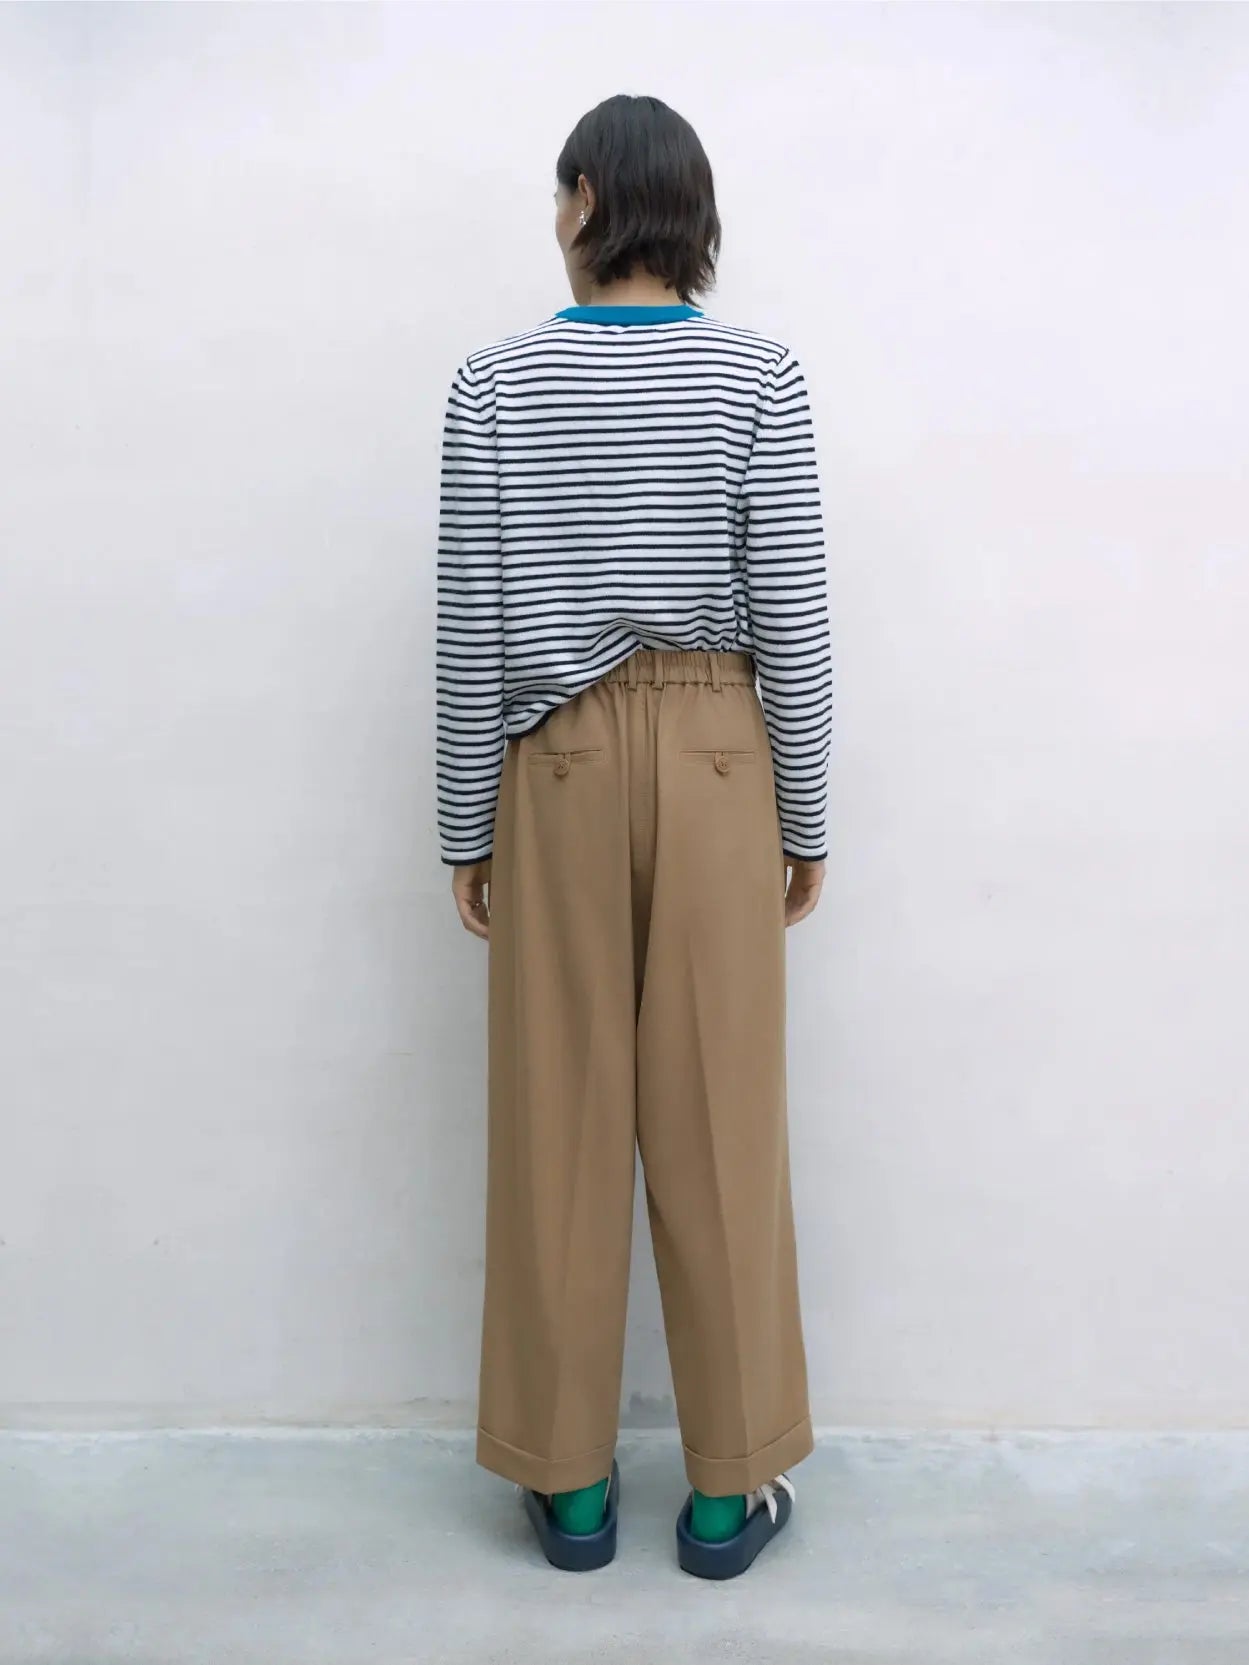 A pair of Tailoring Masculine Pants Camel by Cordera with a button closure at the waist. The pants have a straight-leg design and belt loops. They are laid flat, facing upward, against a plain white background, showcasing the timeless style available exclusively at Bassalstore in Barcelona.